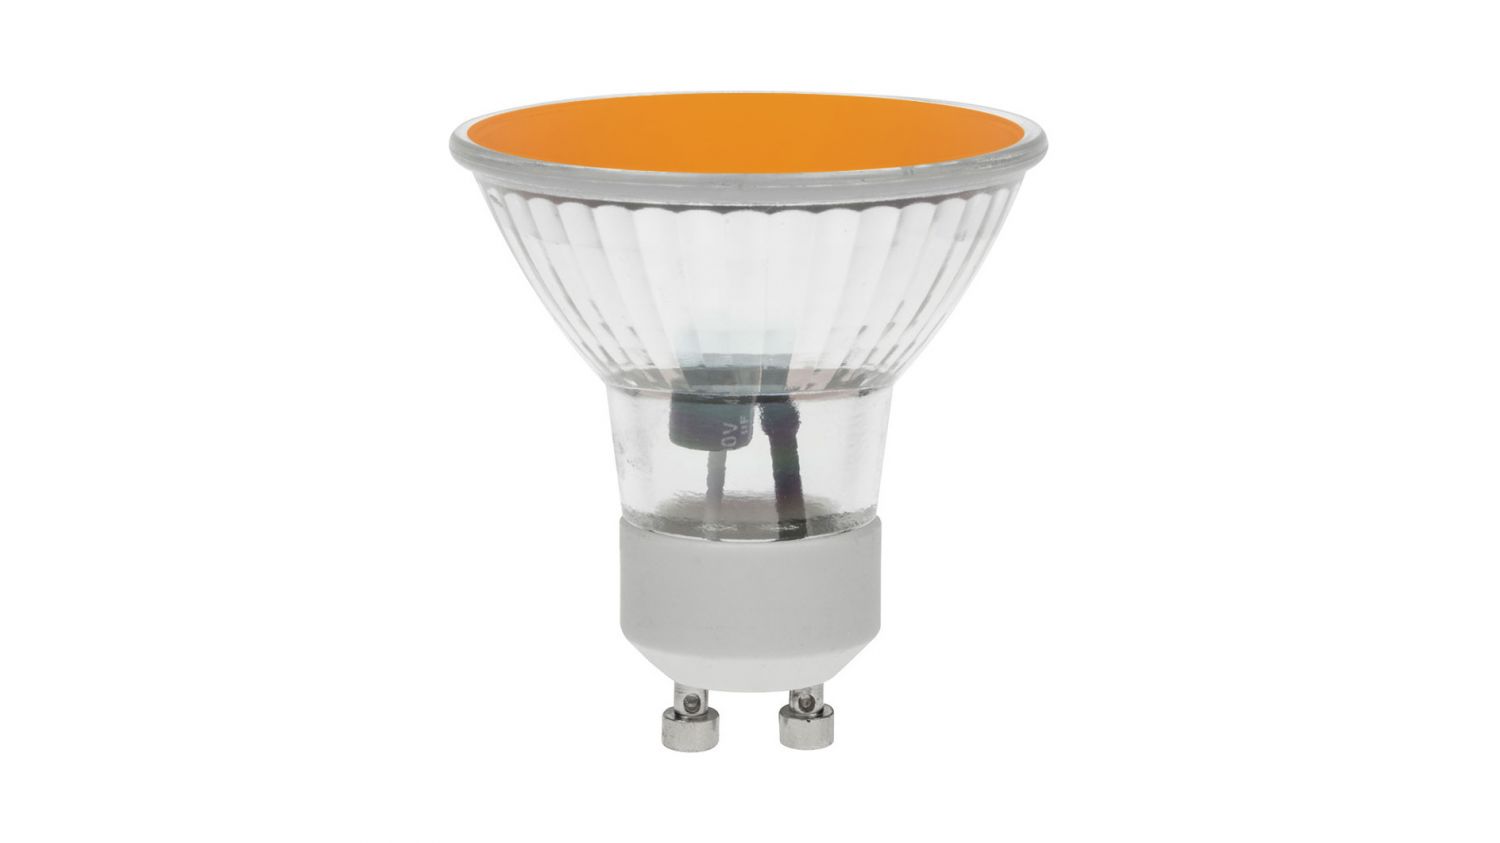 Pro-Lite GU10/LED/1.8W/AMBER: 1.8w LED GU10 Bulb, amber, non dimmable, 120°  beam - from £3.04